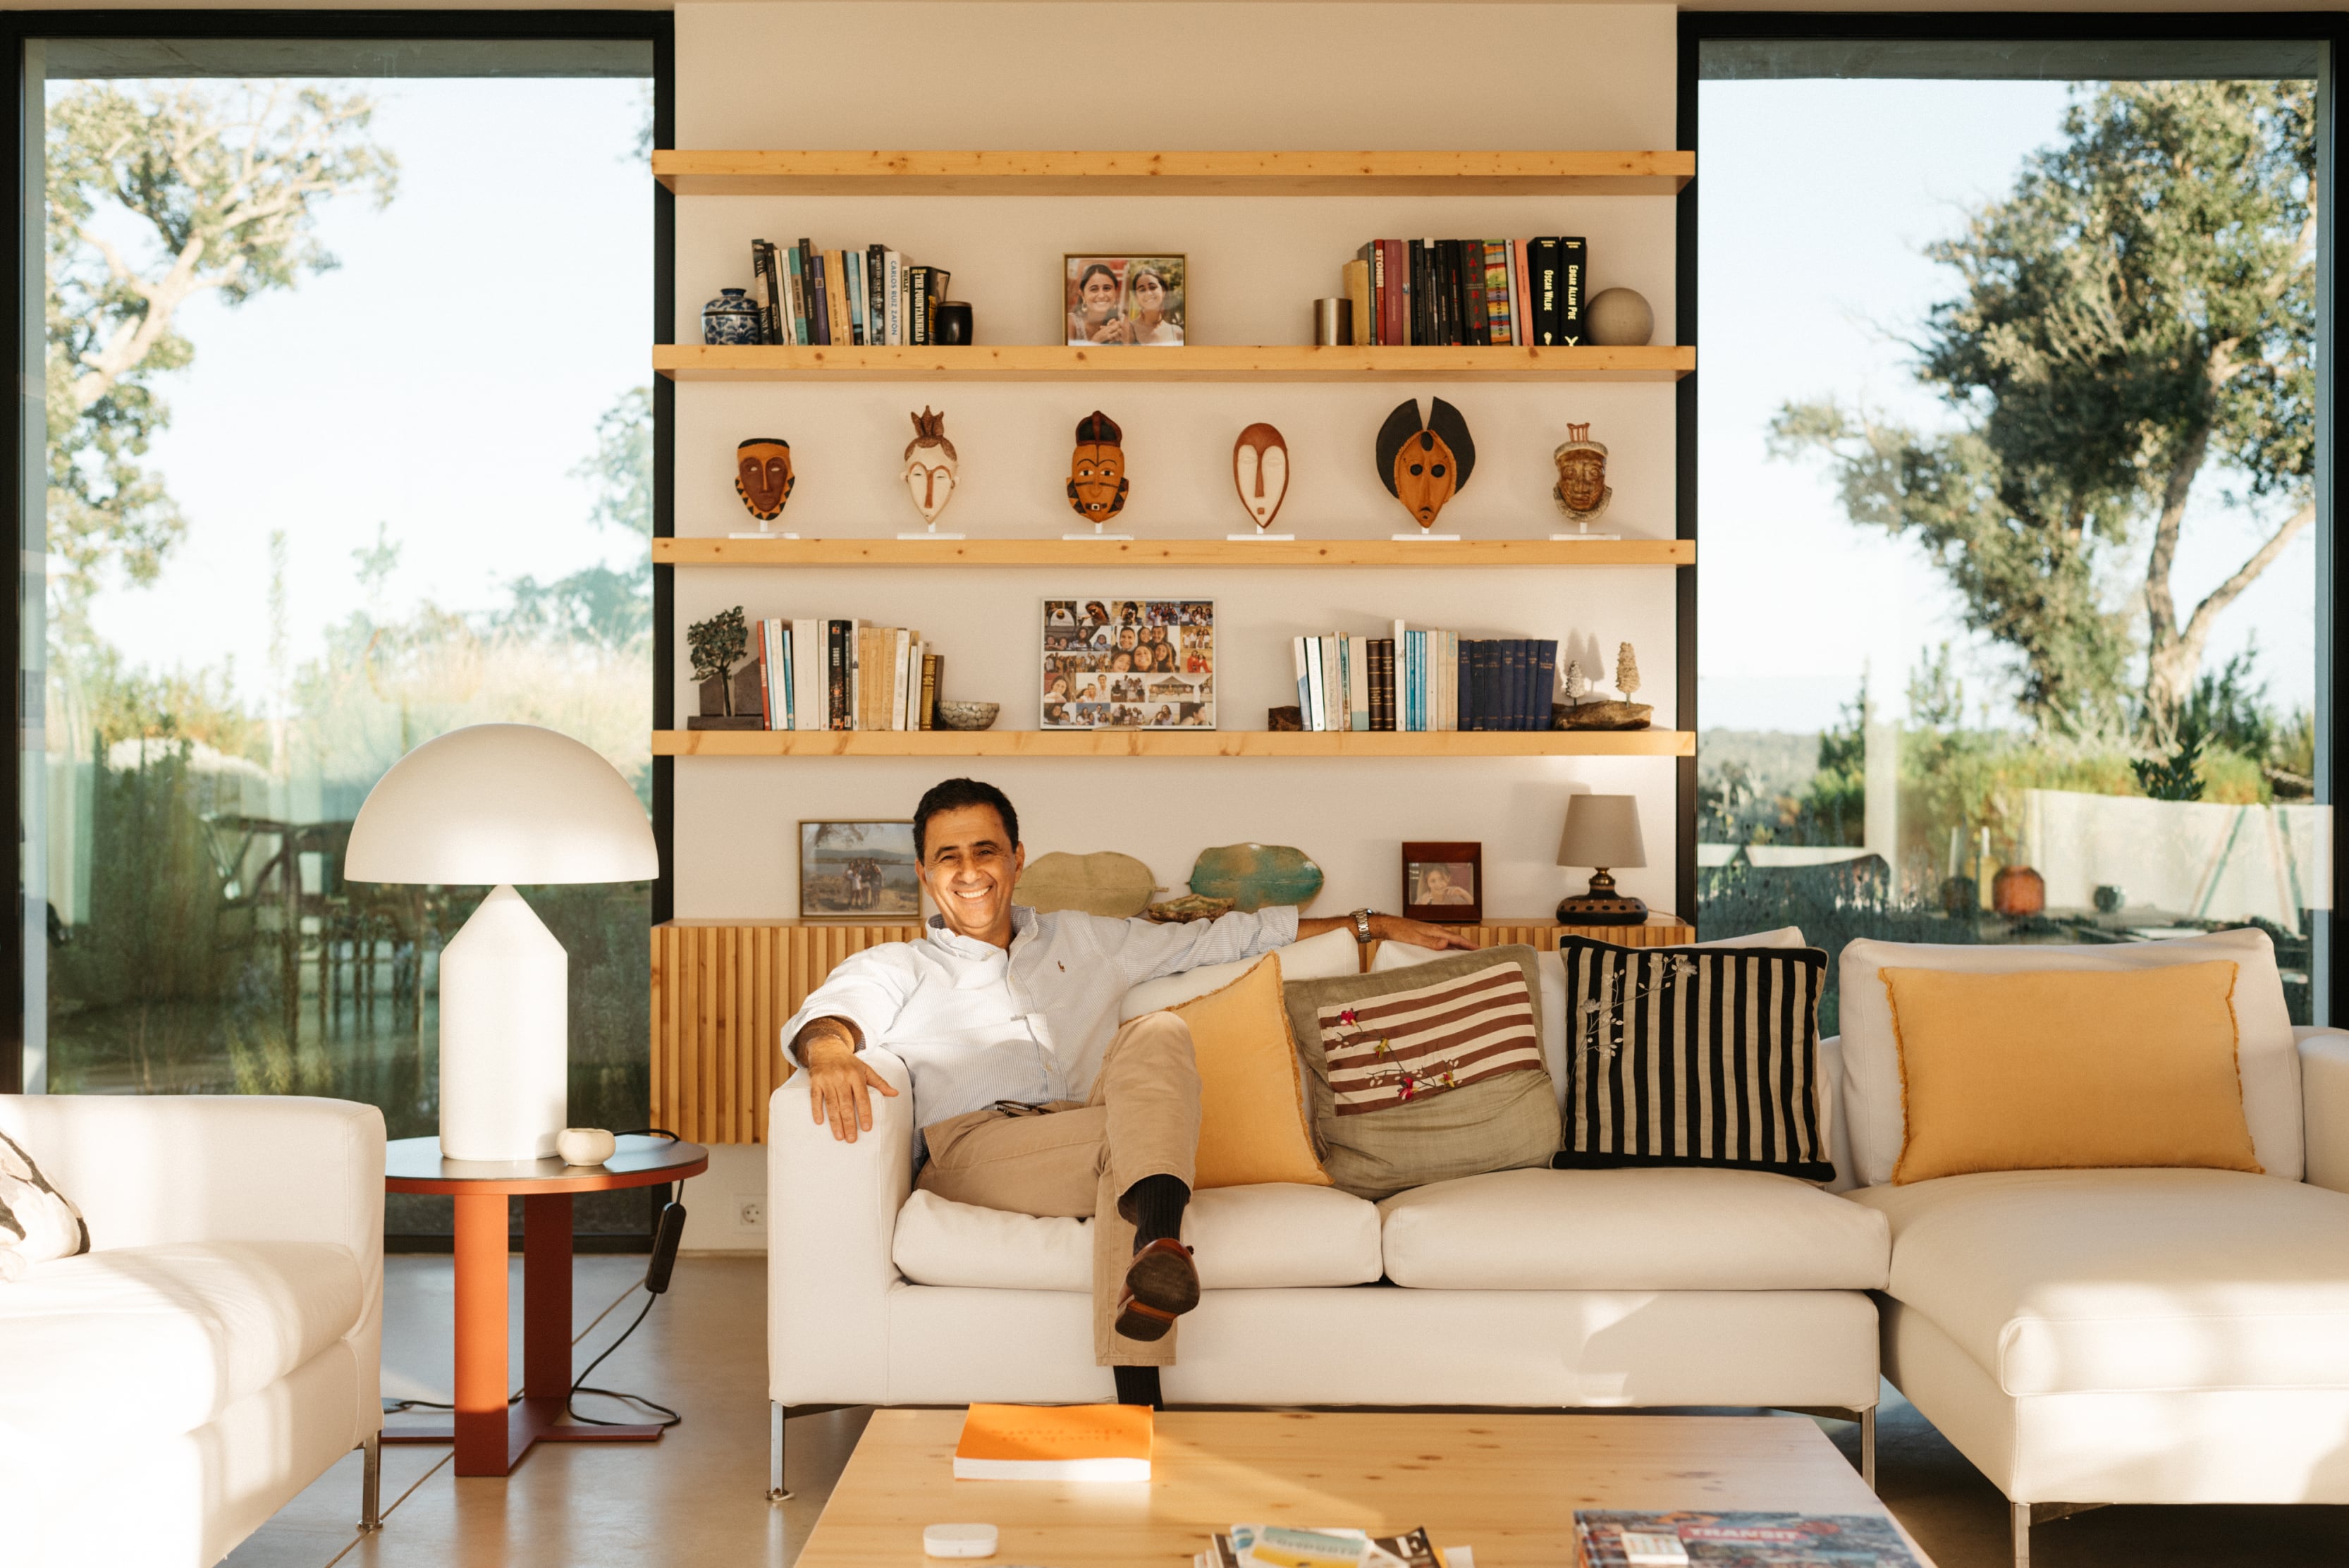 Timeless functionality at Casa das 4 Serras: interview with Joao Serra